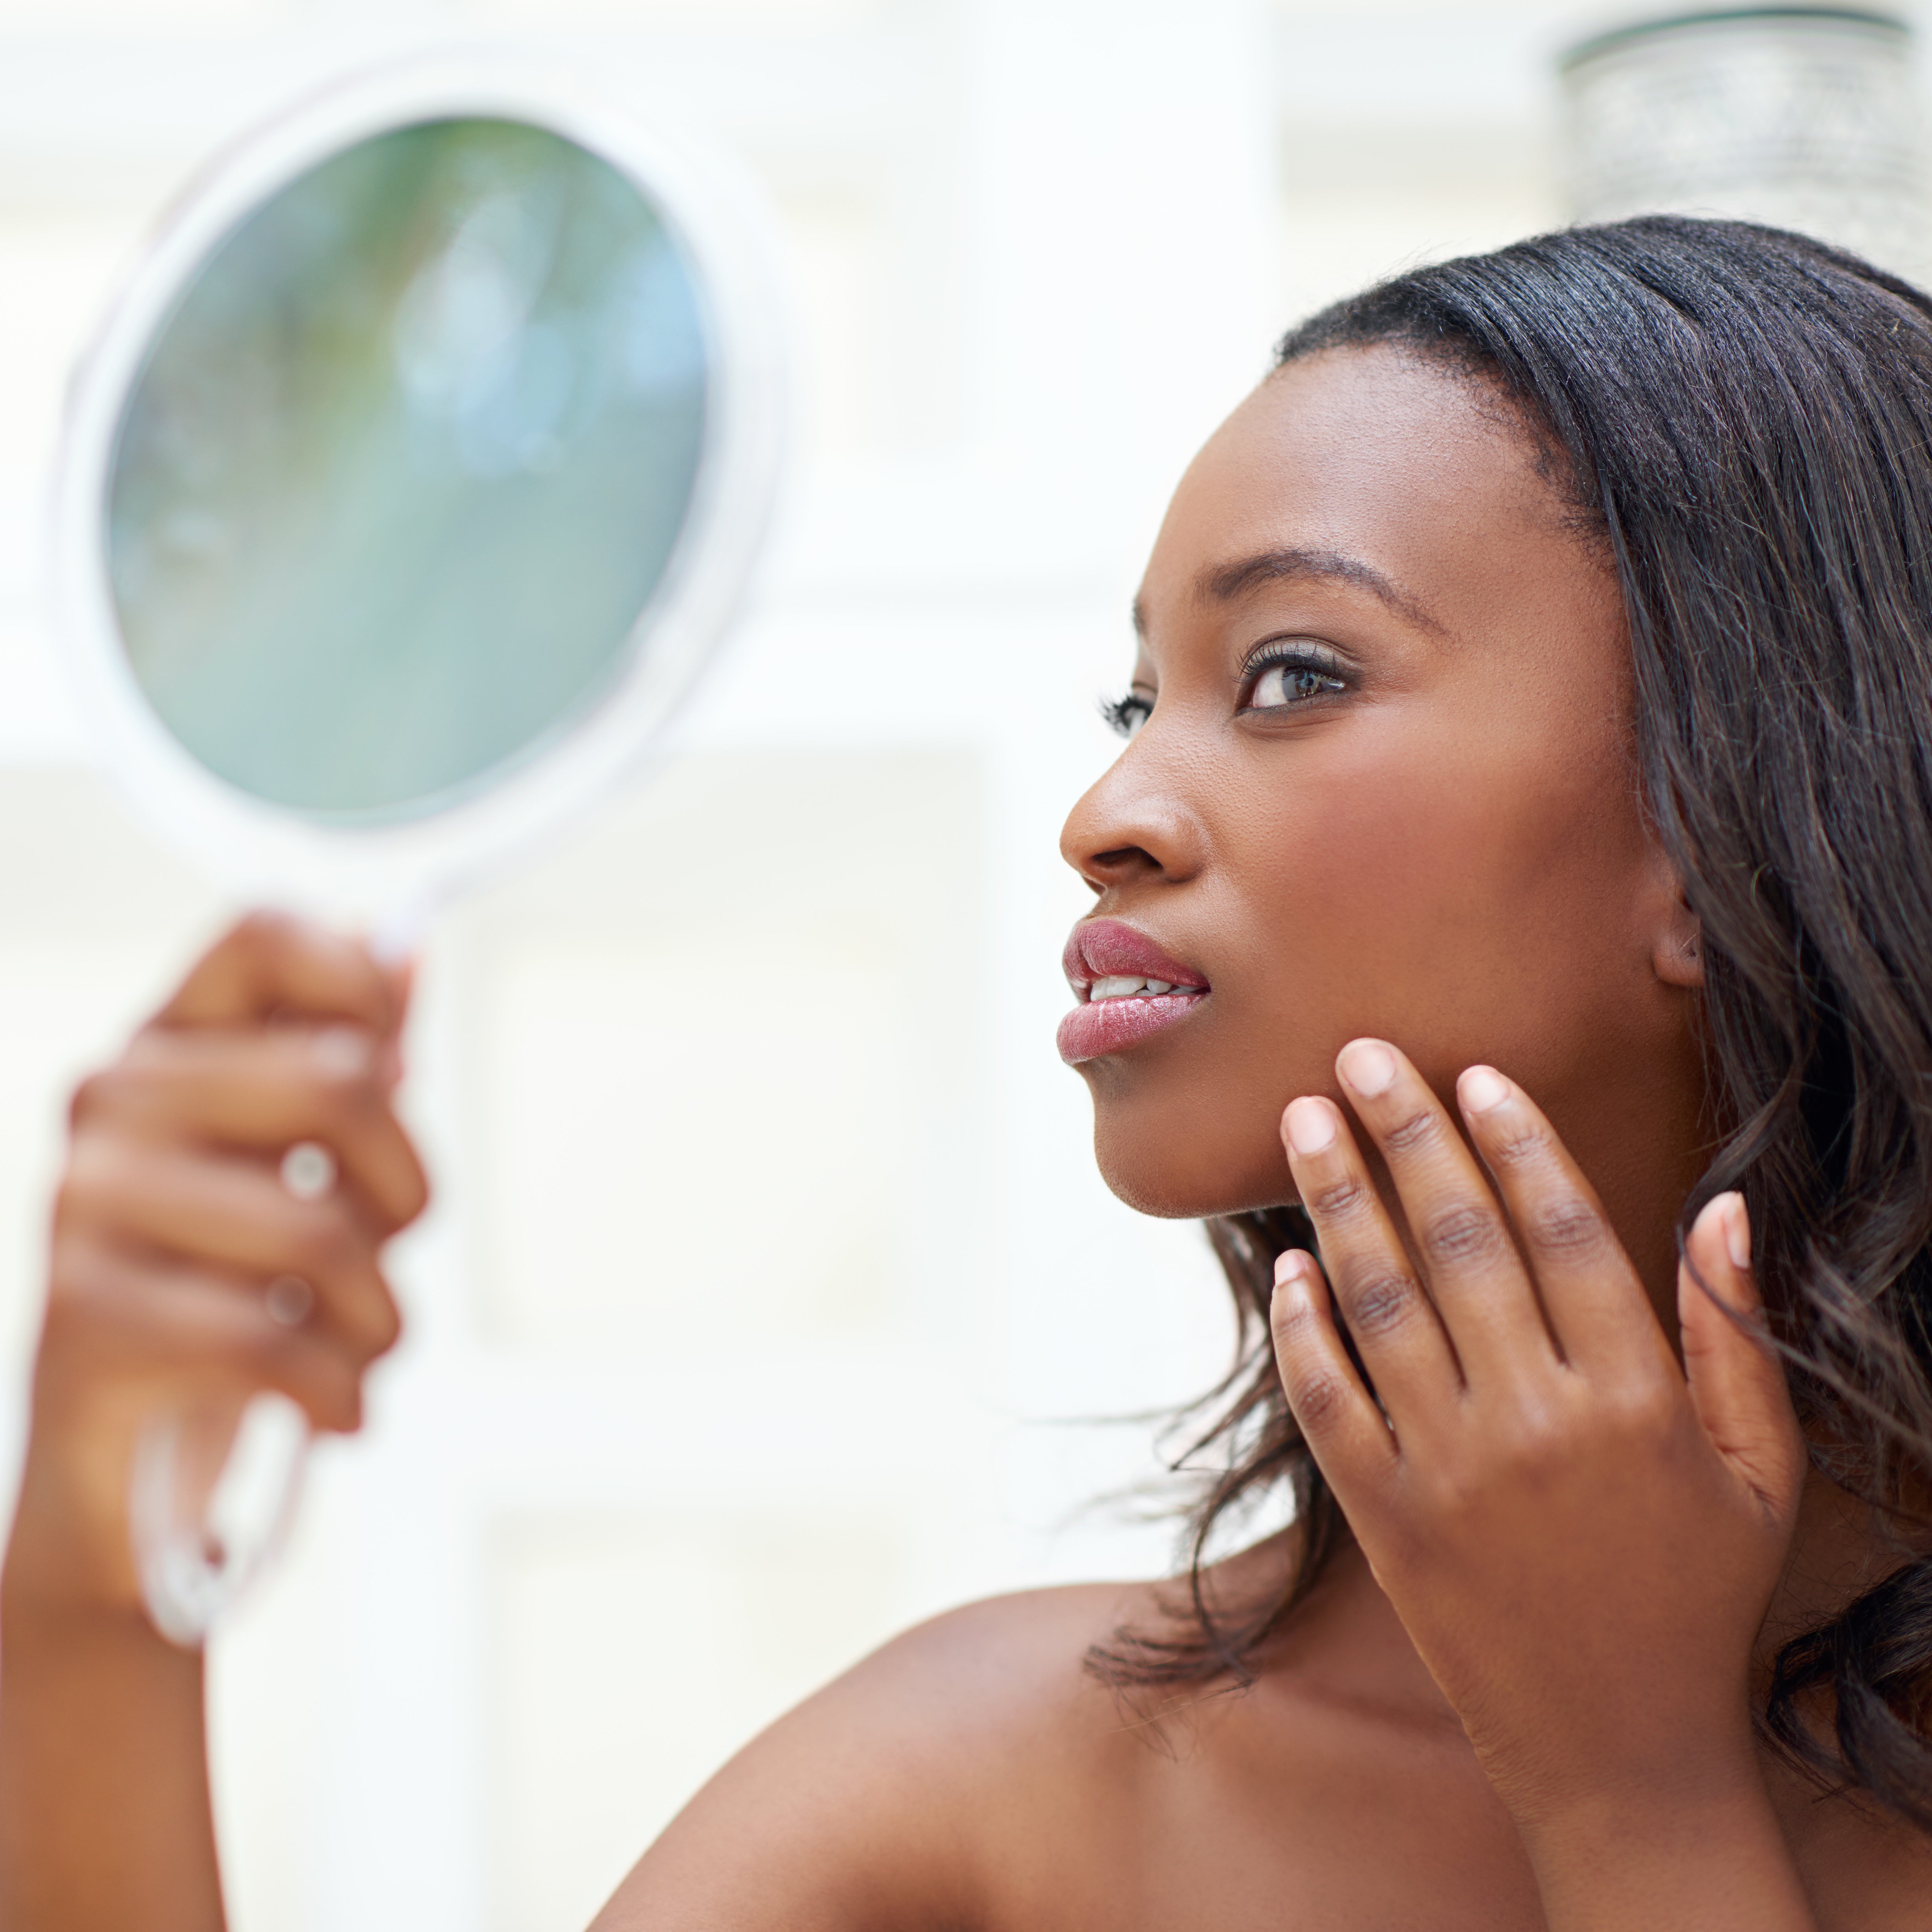 7 Solutions To Help You With Your Skin Problems